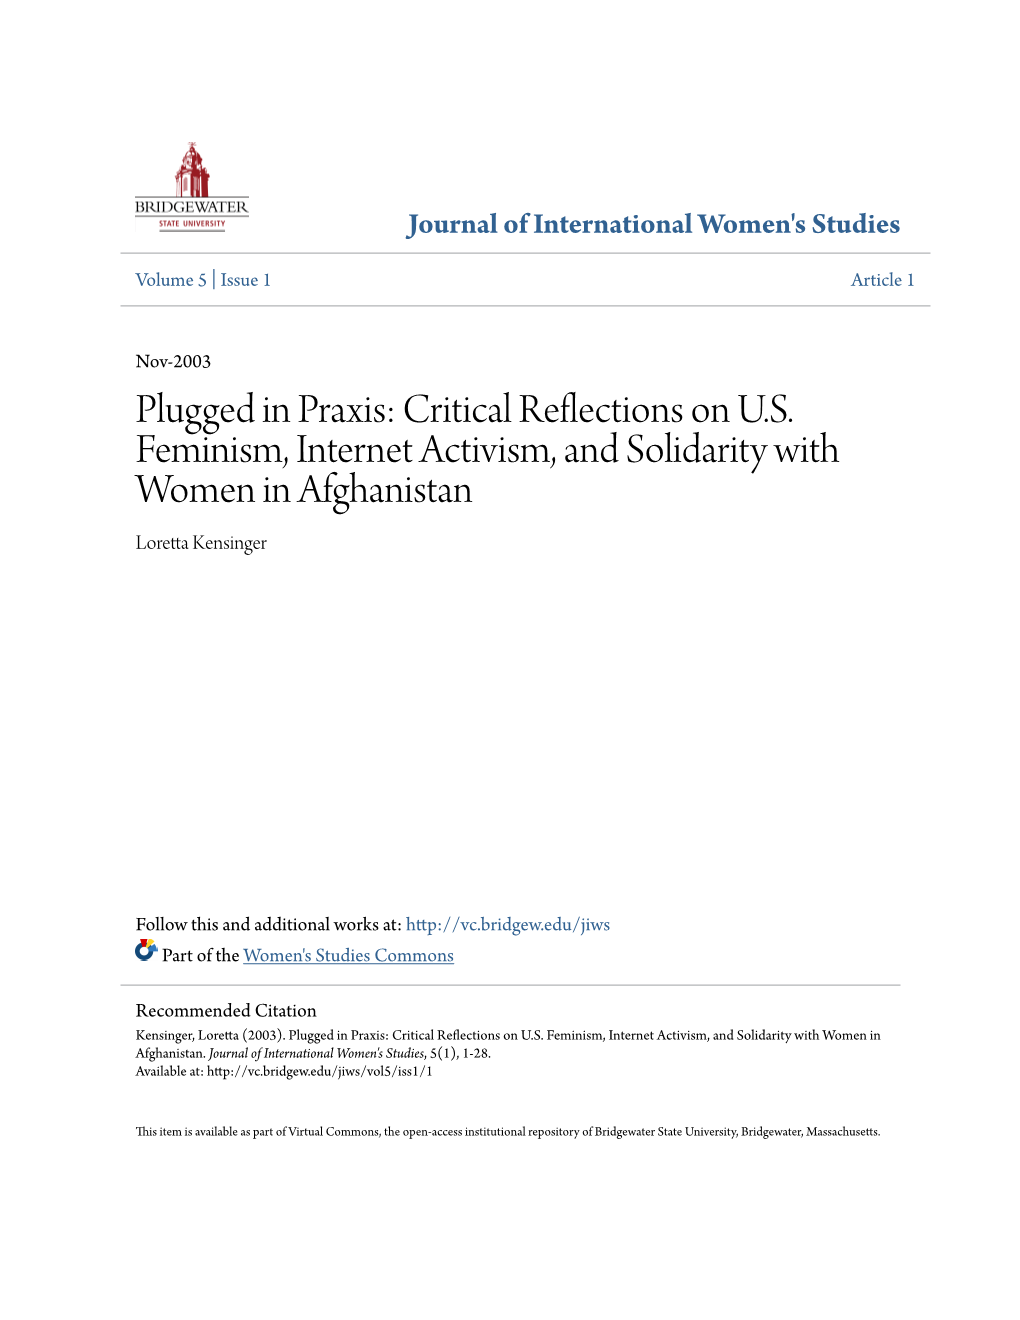 Plugged in Praxis: Critical Reflections on U.S. Feminism, Internet Activism, and Solidarity with Women in Afghanistan Loretta Kensinger